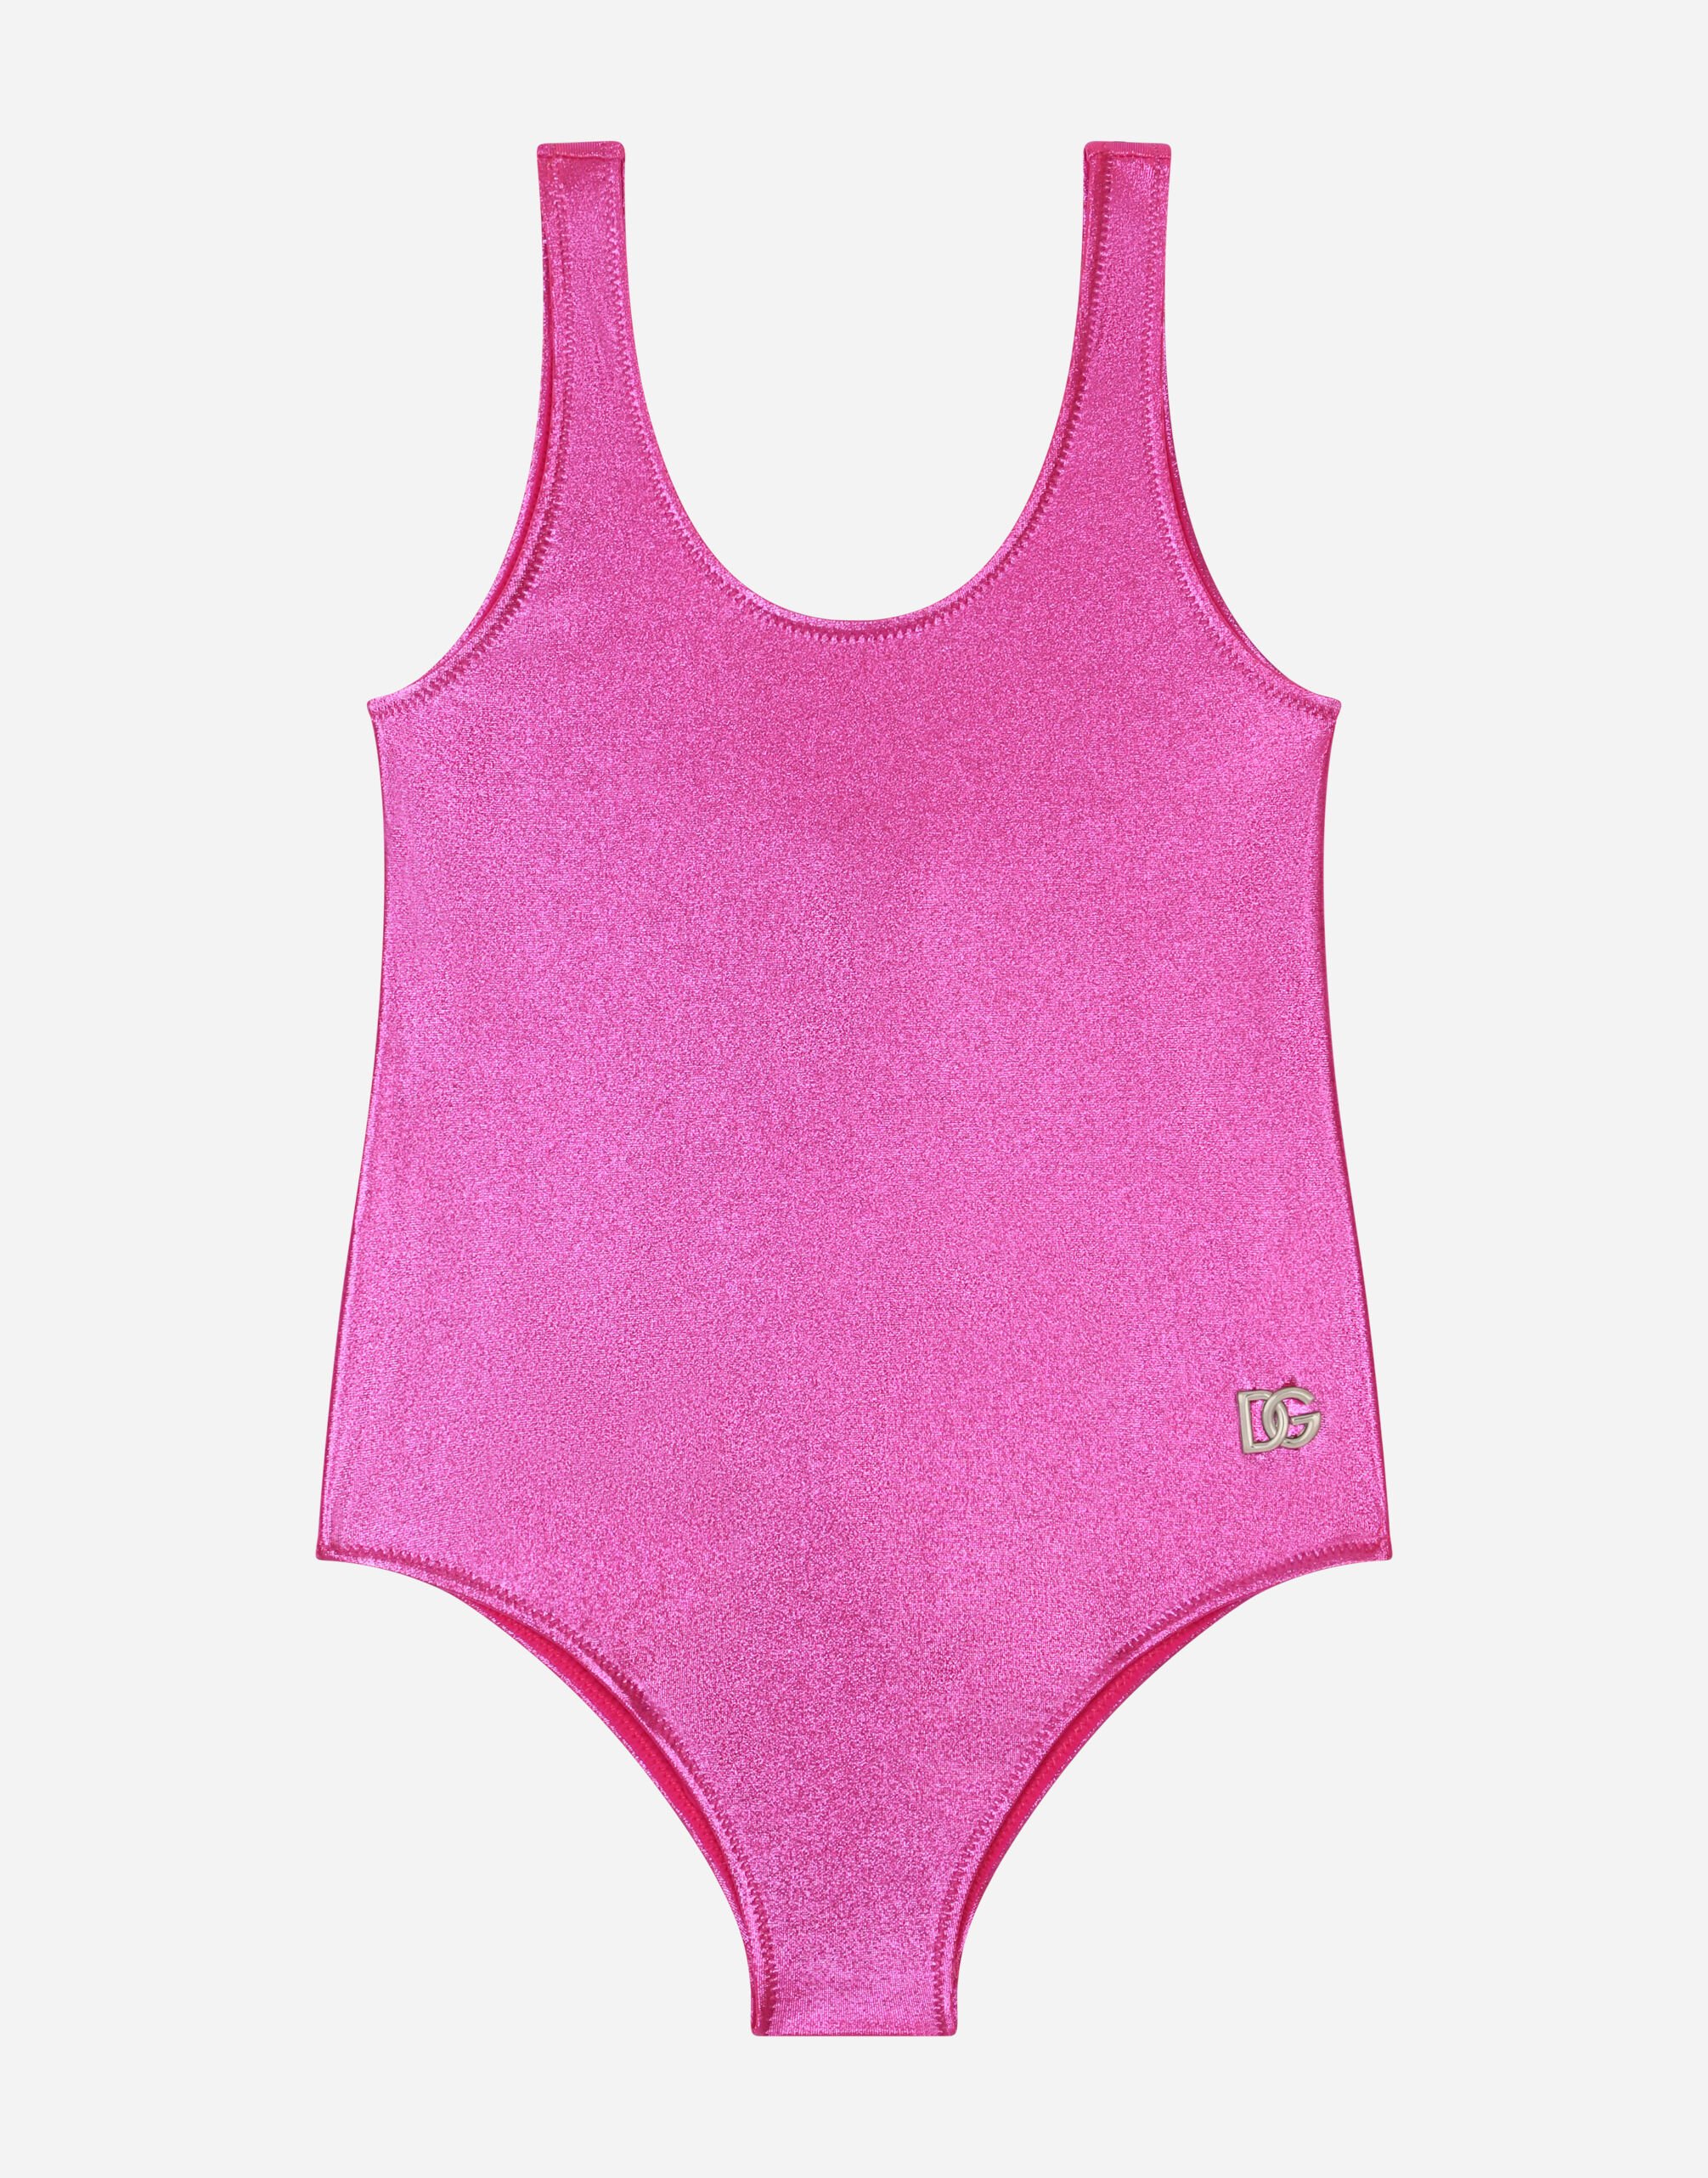 ${brand} One-piece swimsuit with DG logo ${colorDescription} ${masterID}